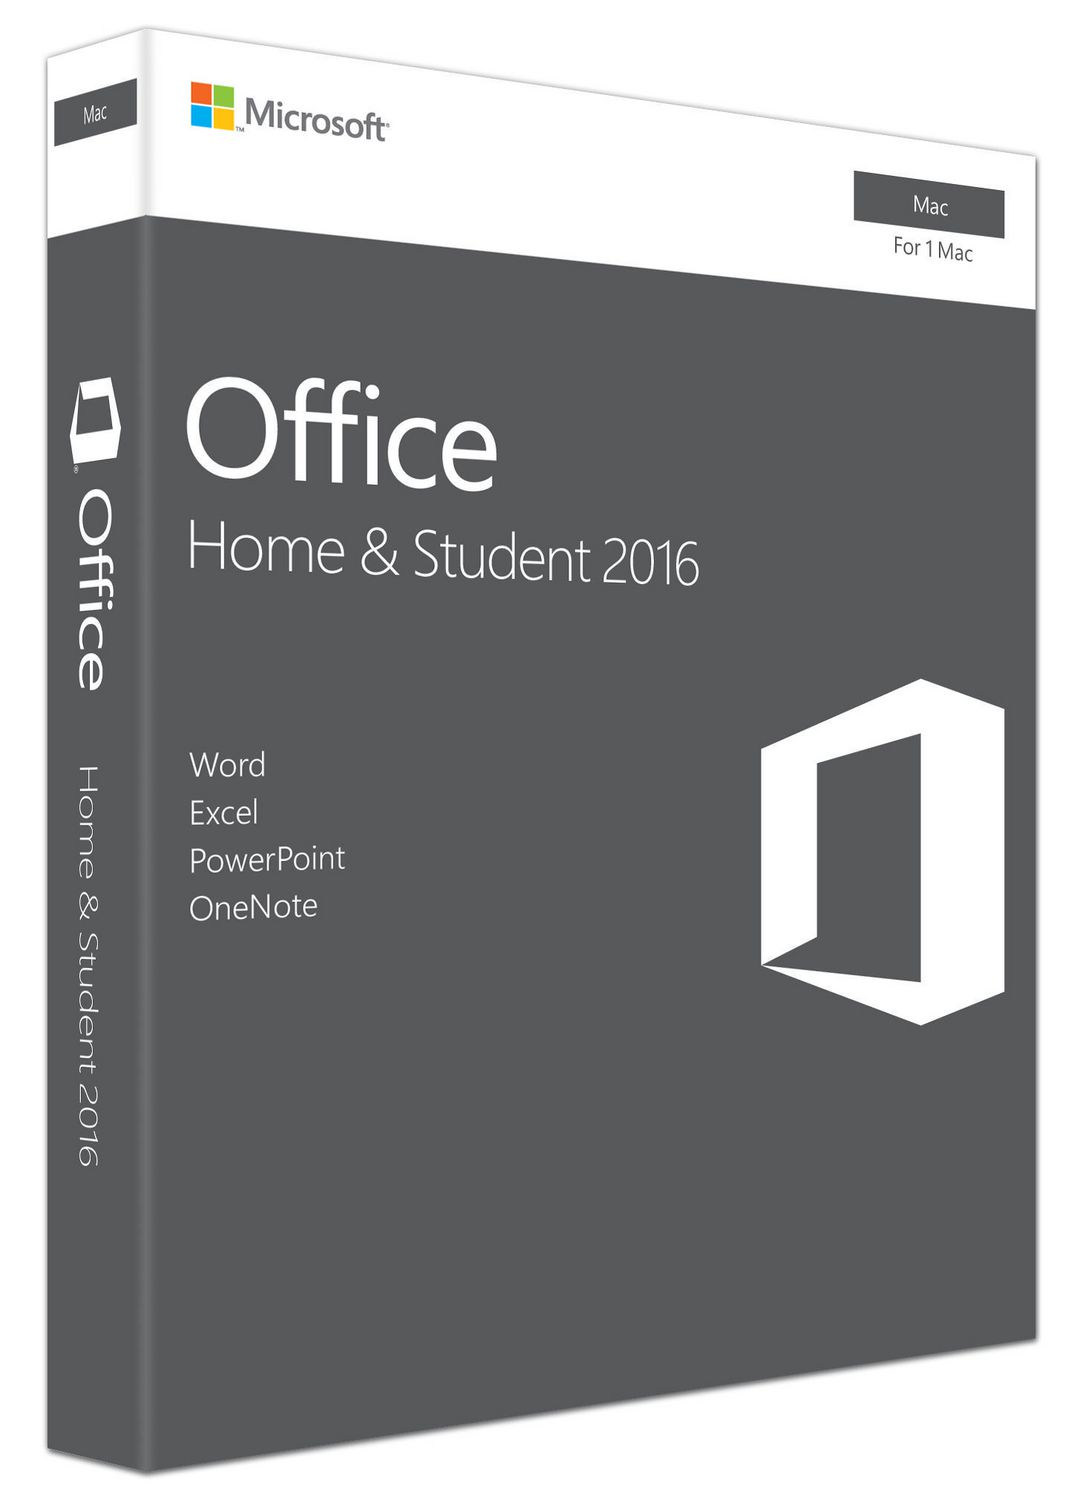 Microsoft Office 2016 Home & Student for Mac (English)